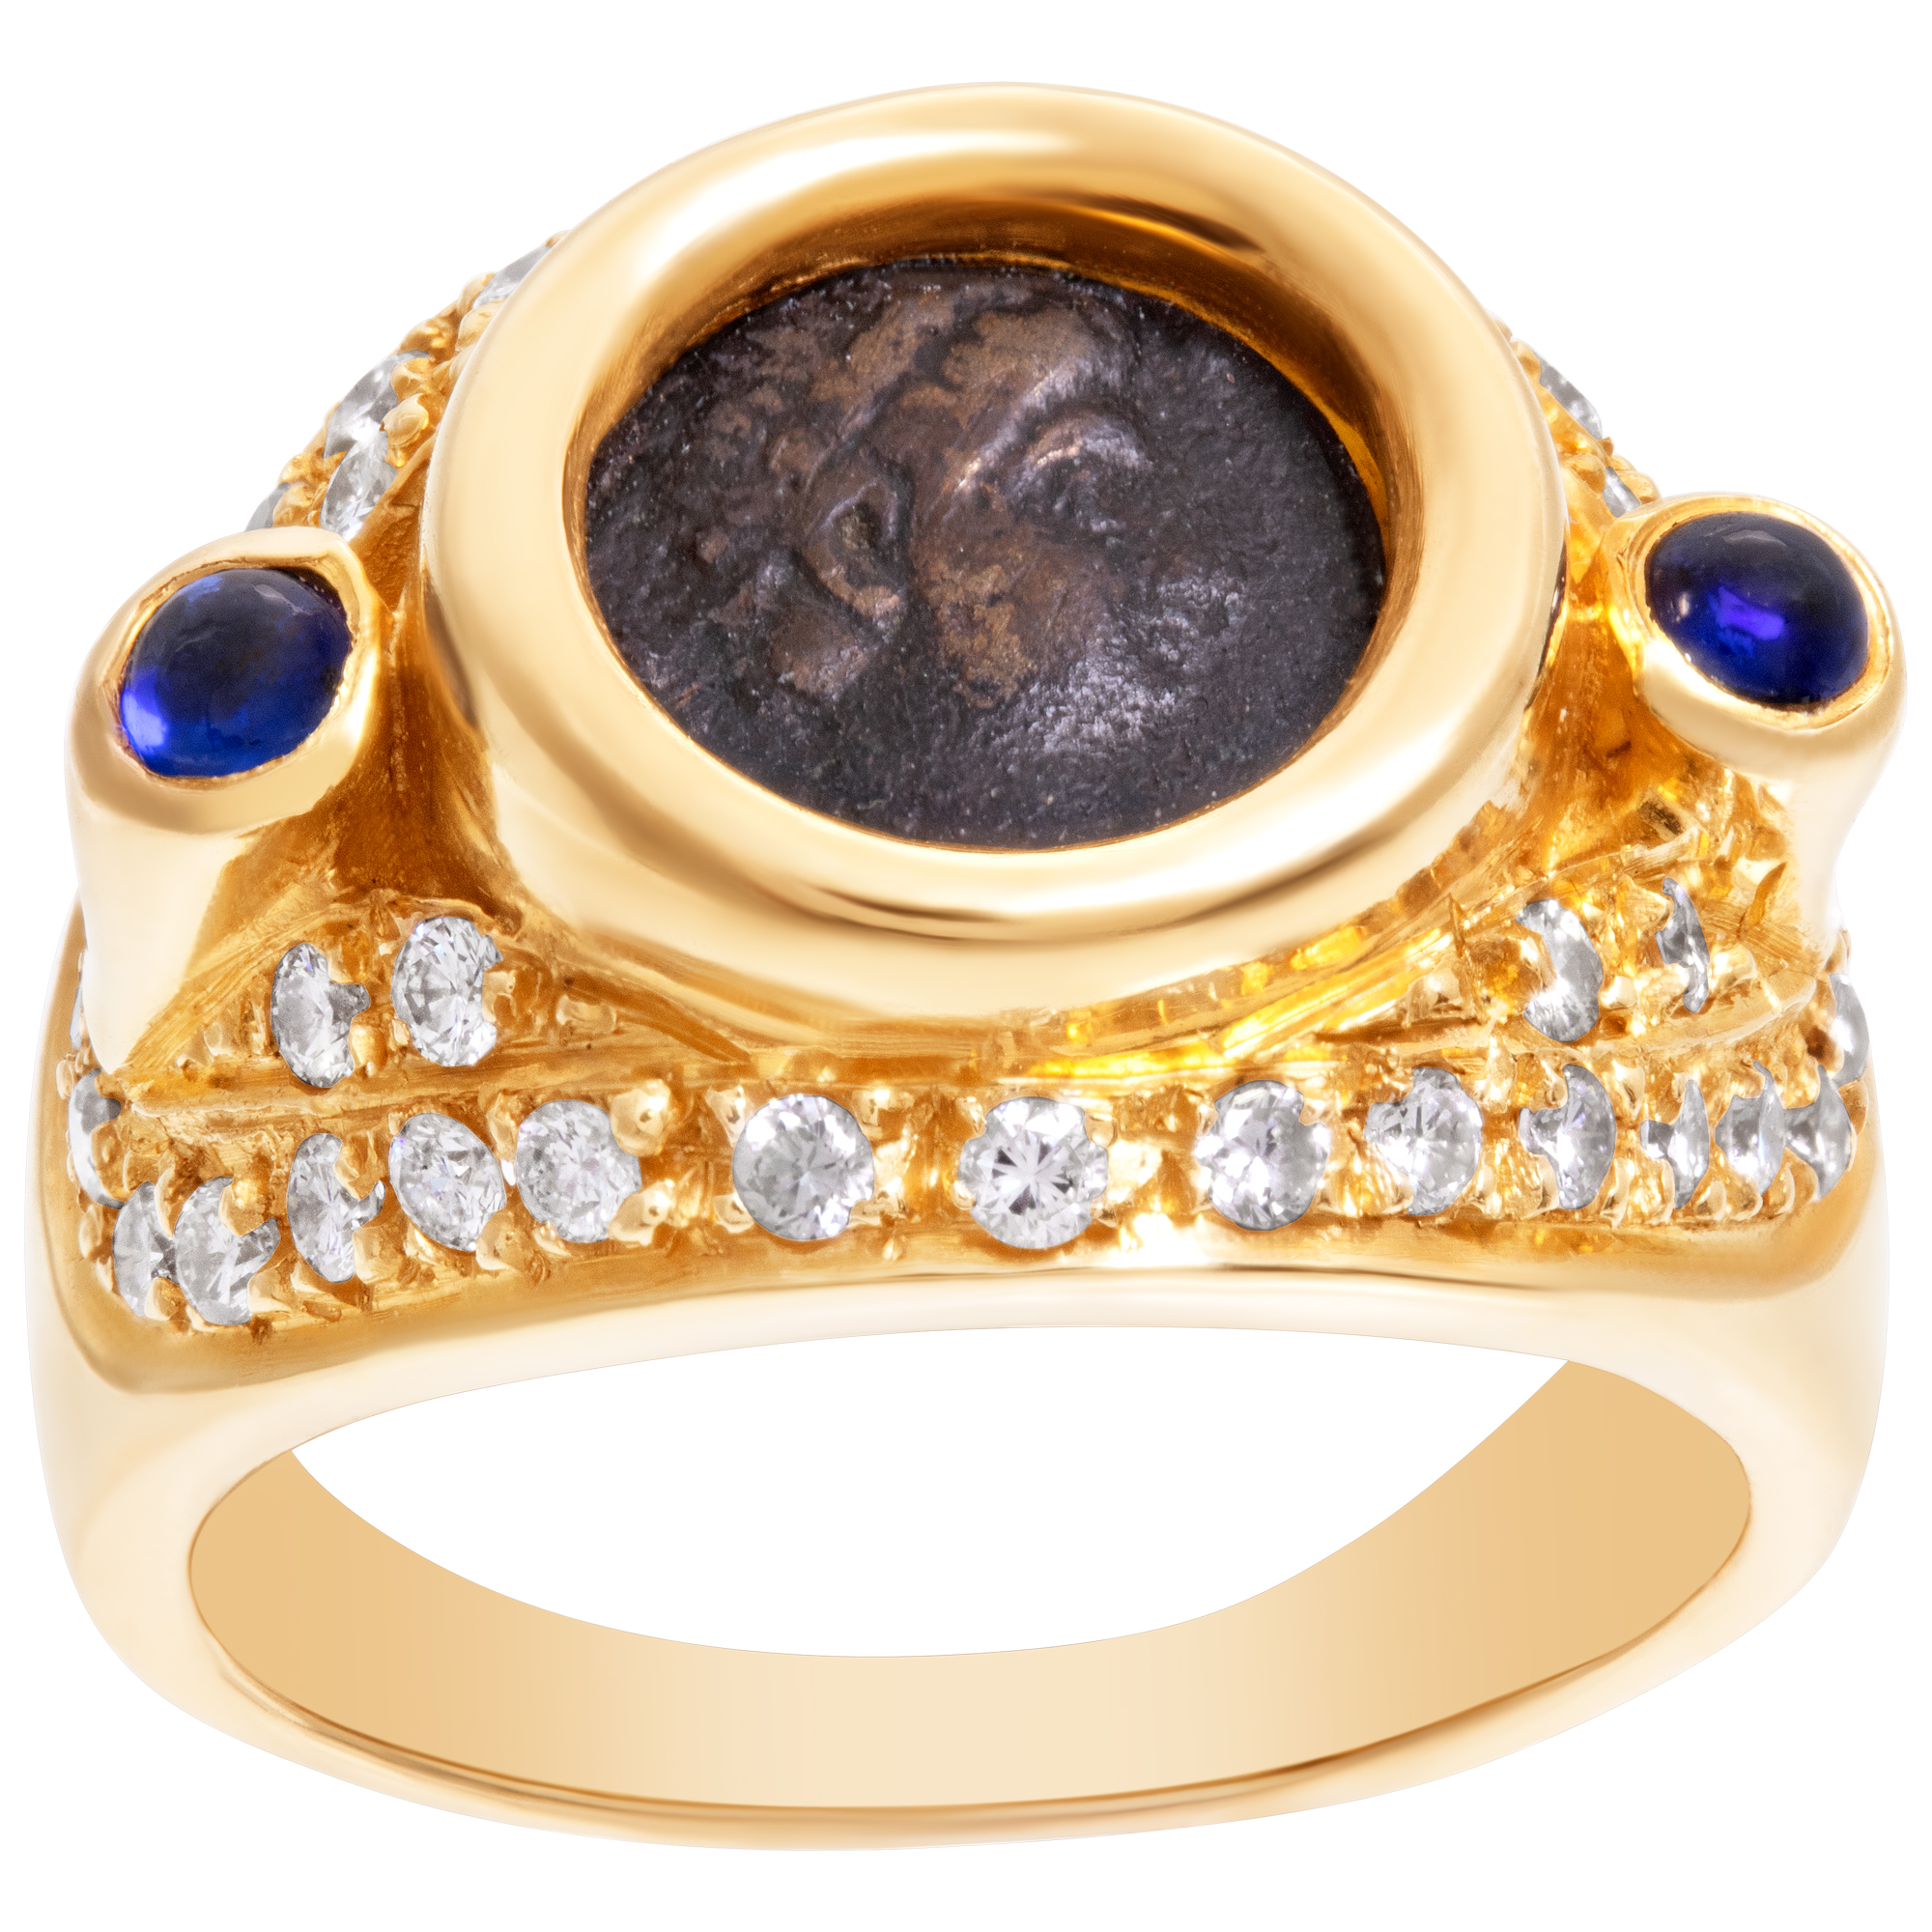 Ancient Greek coin set in 18k yellow gold ring with cabochon sapphires and round brilliant cut diamonds image 1